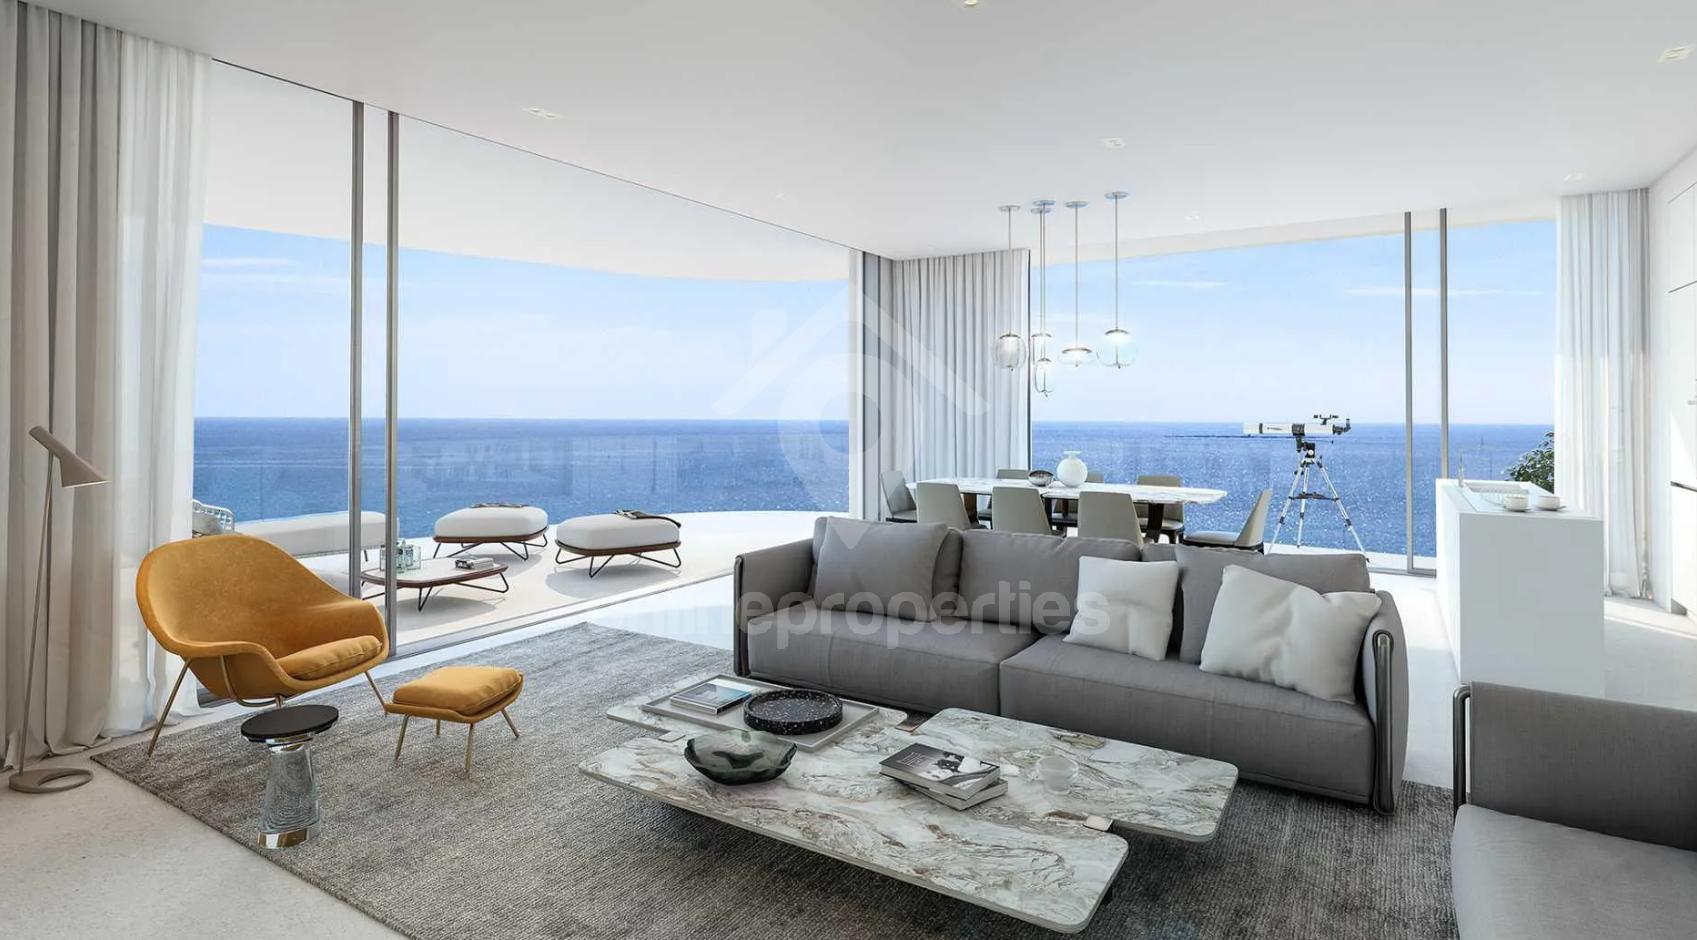 Stunning penthouses, new residential tower by the sea